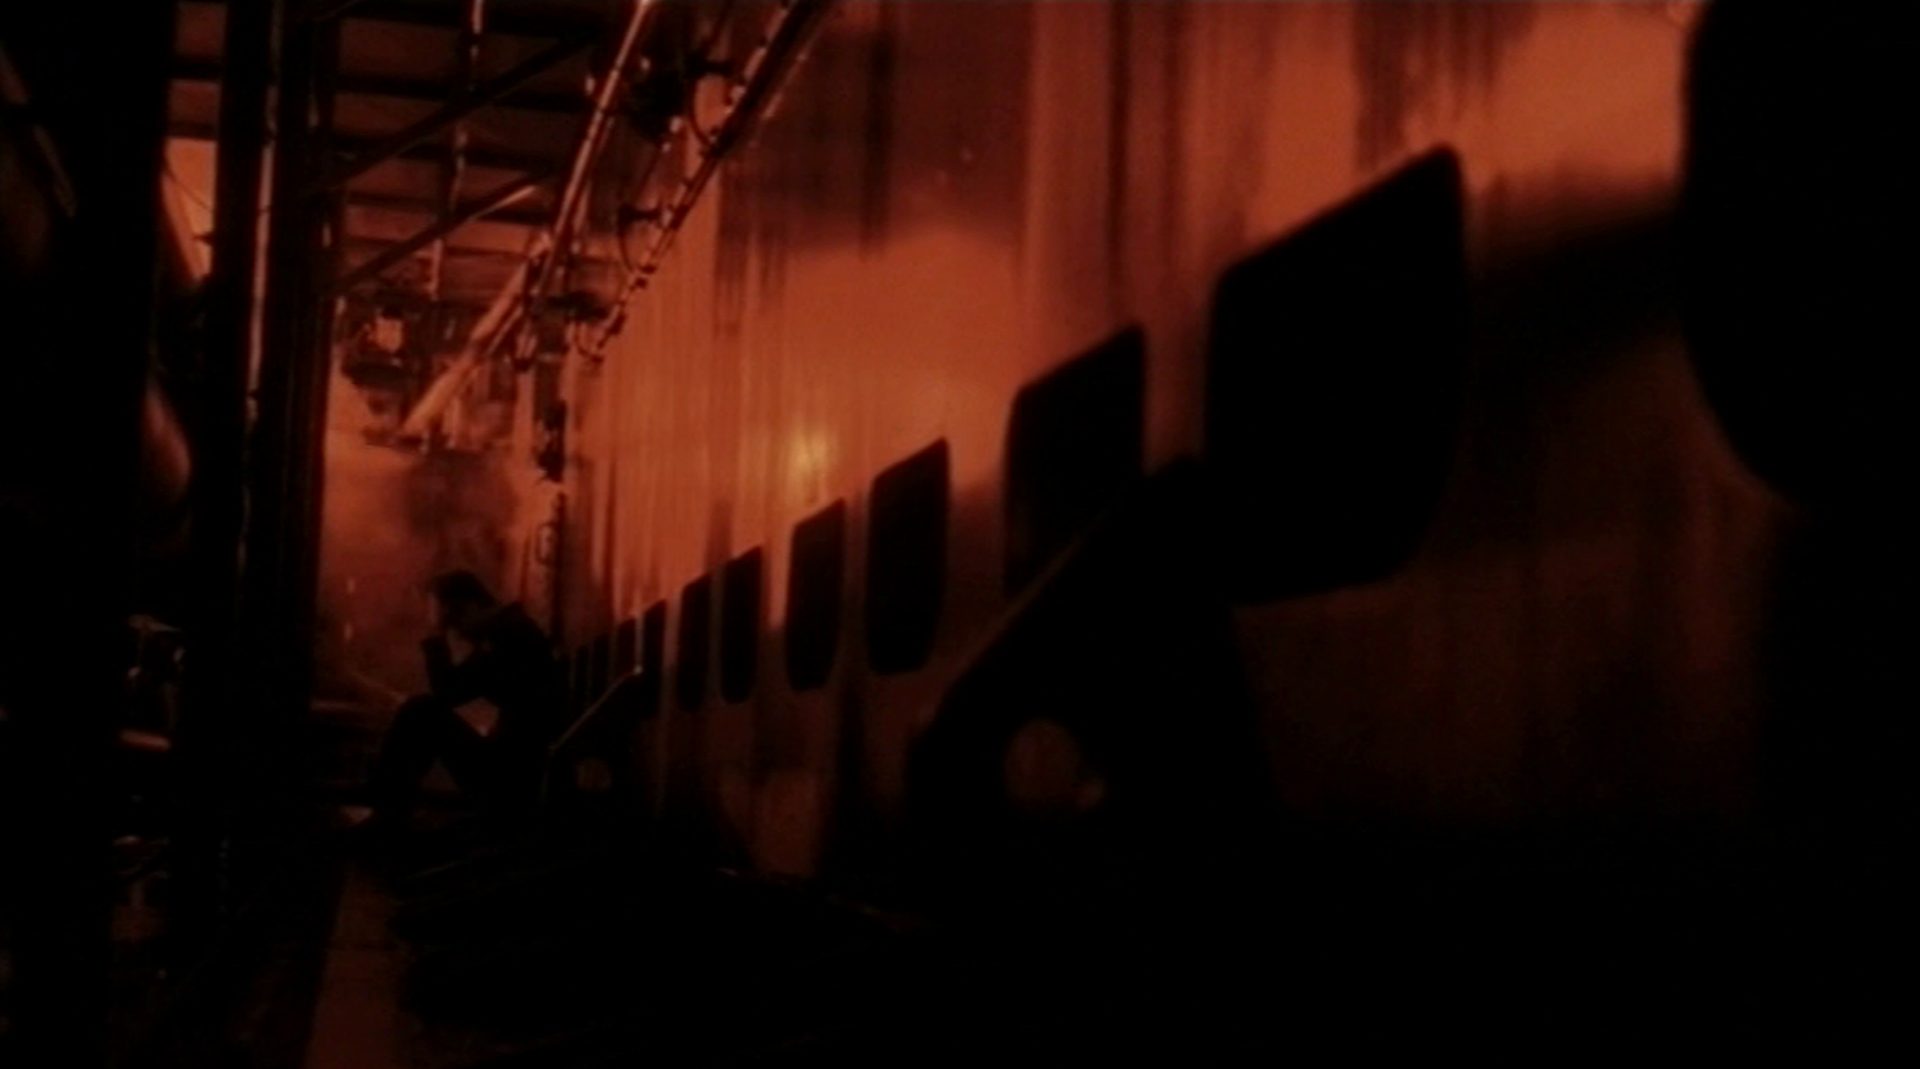 Gloomy, reddish colored scene in the submarine, in the background a sailor crouches, his face buried in his hands.